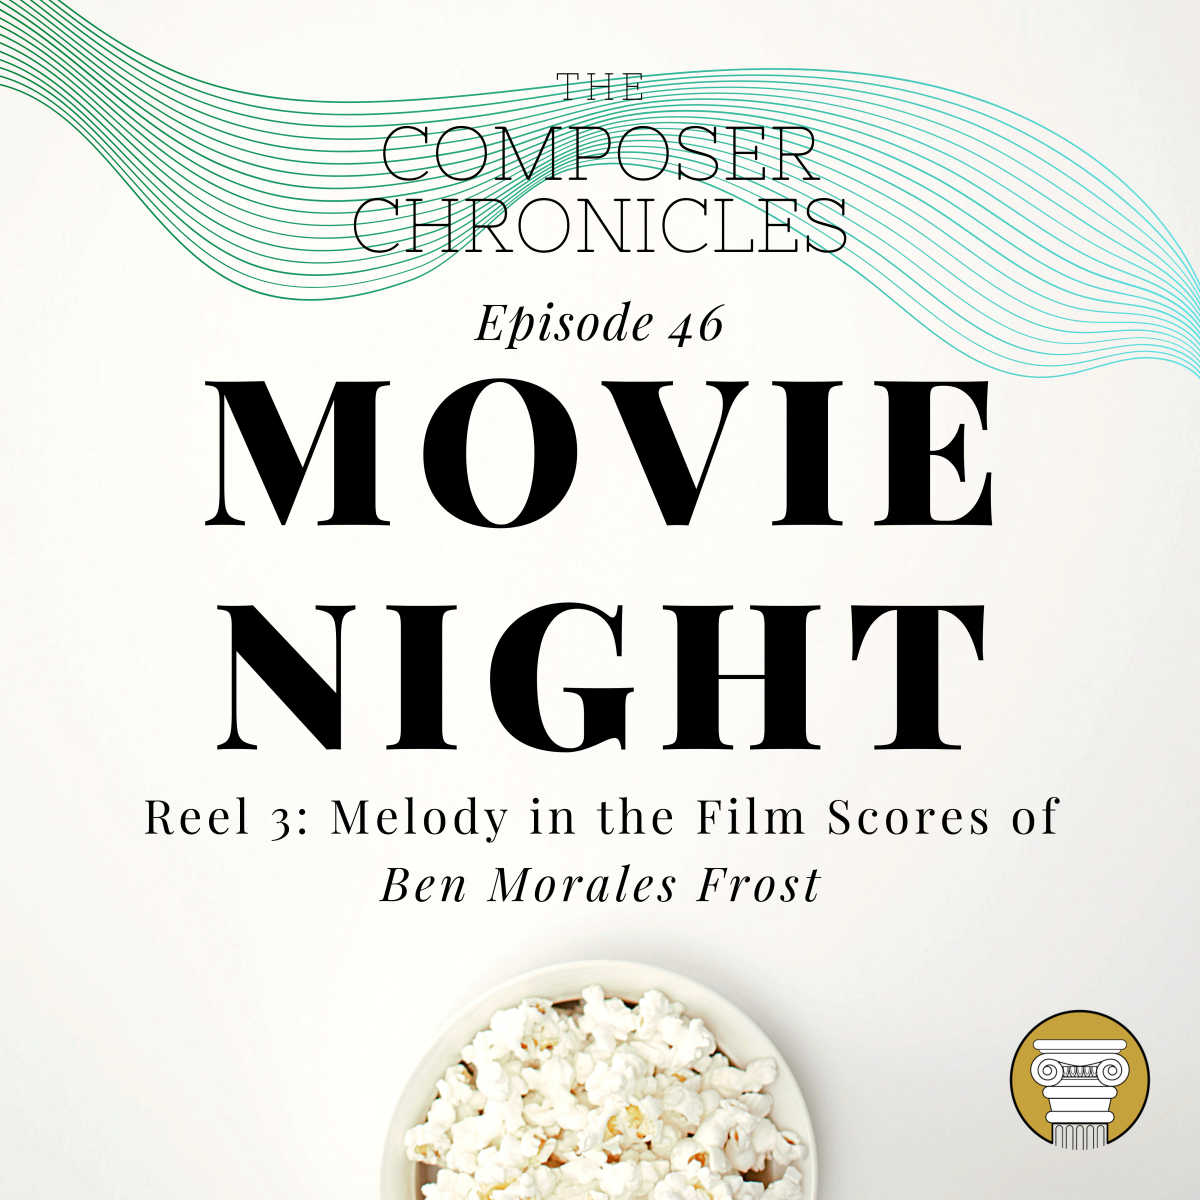 Ep. 46: Movie Night (Reel 3): Melody in the Film Scores of Ben Morales Frost